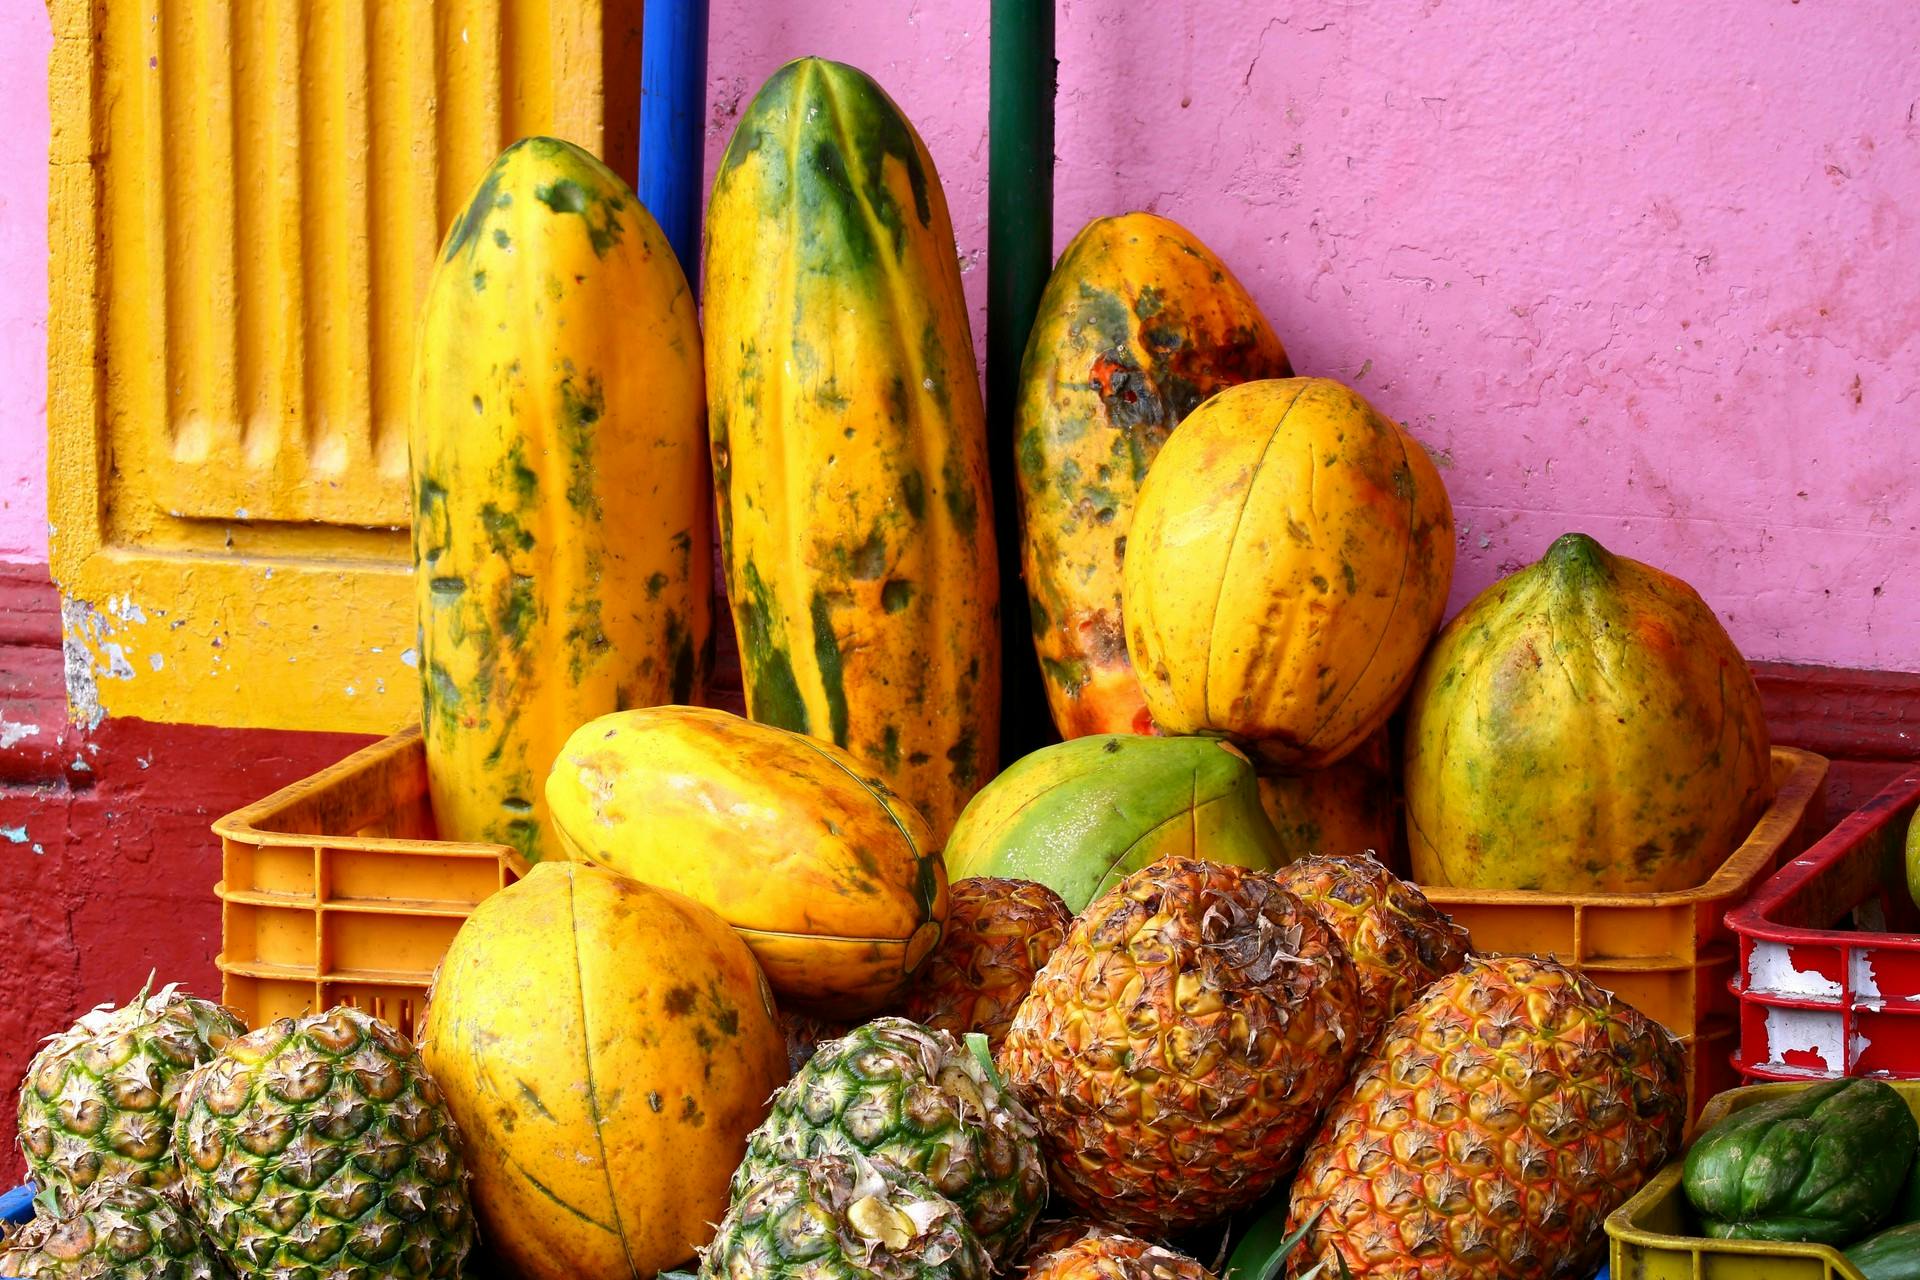 Fruit for sale in Nicaragua